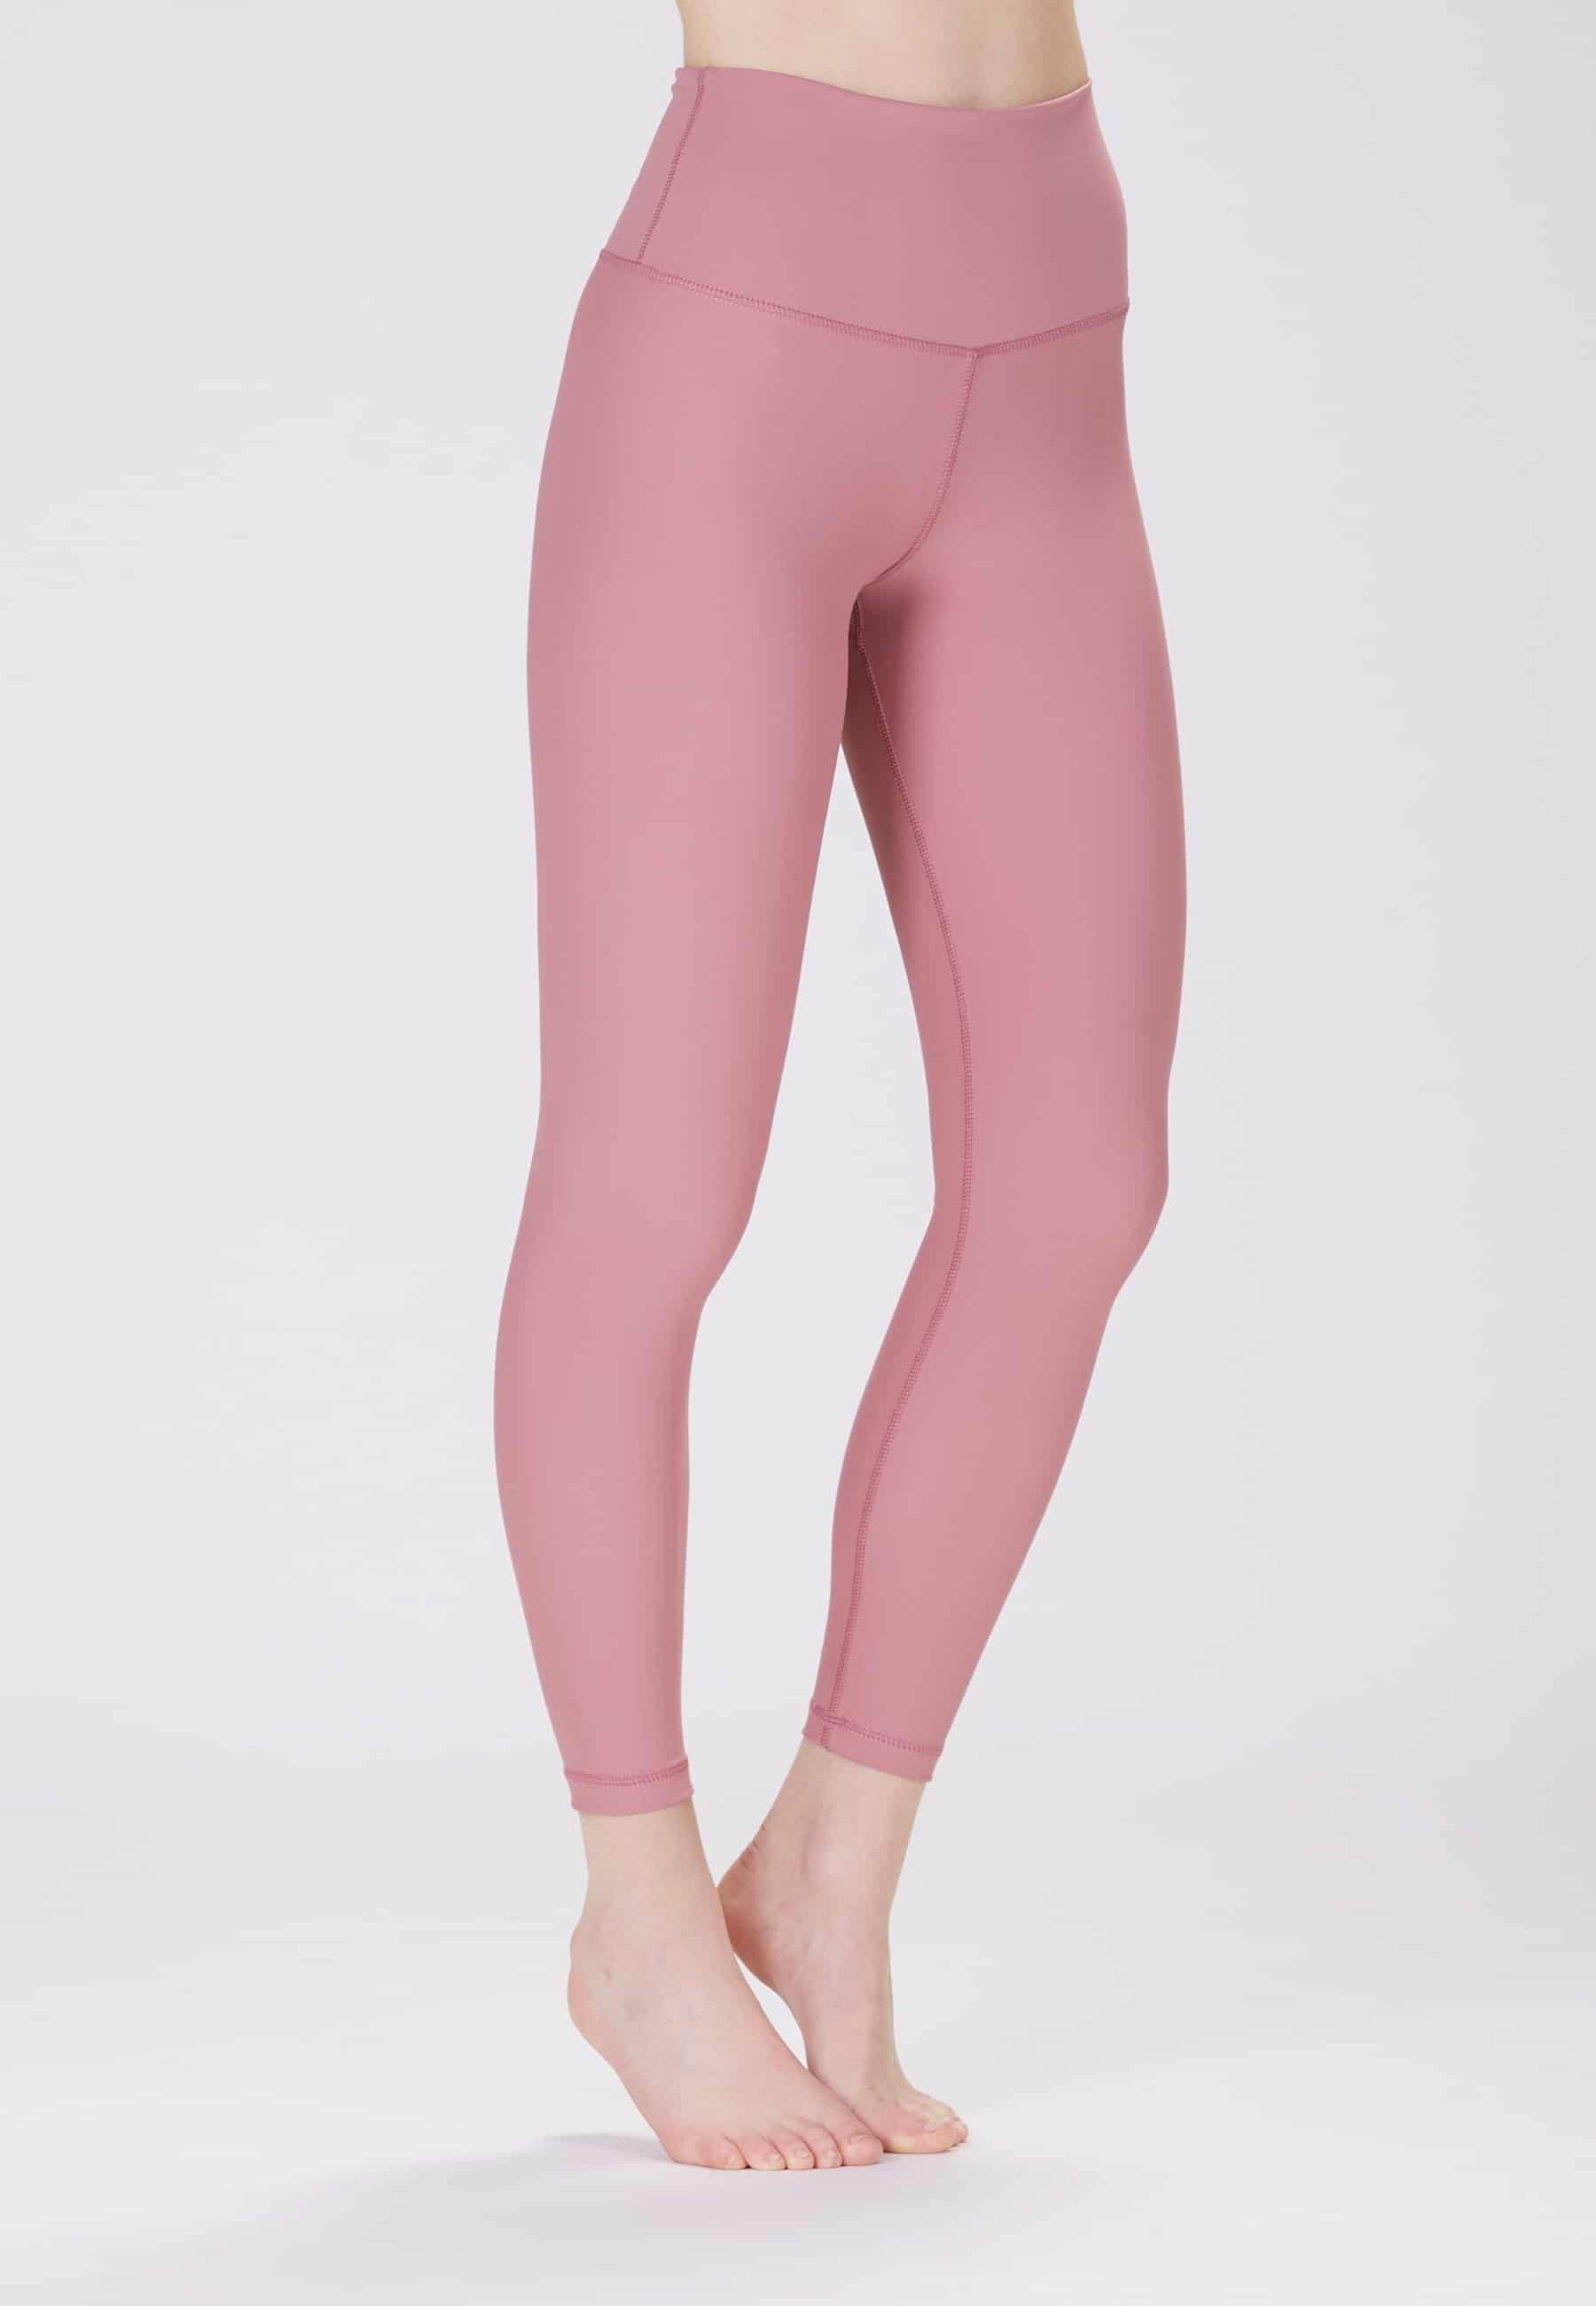 Sisterly Tribe - Classic 7/8 Tights Dusty Pink. Buttery soft & Body sculpting, Soft, matte fabric that feels like a second skin, Compression that follows your every move.